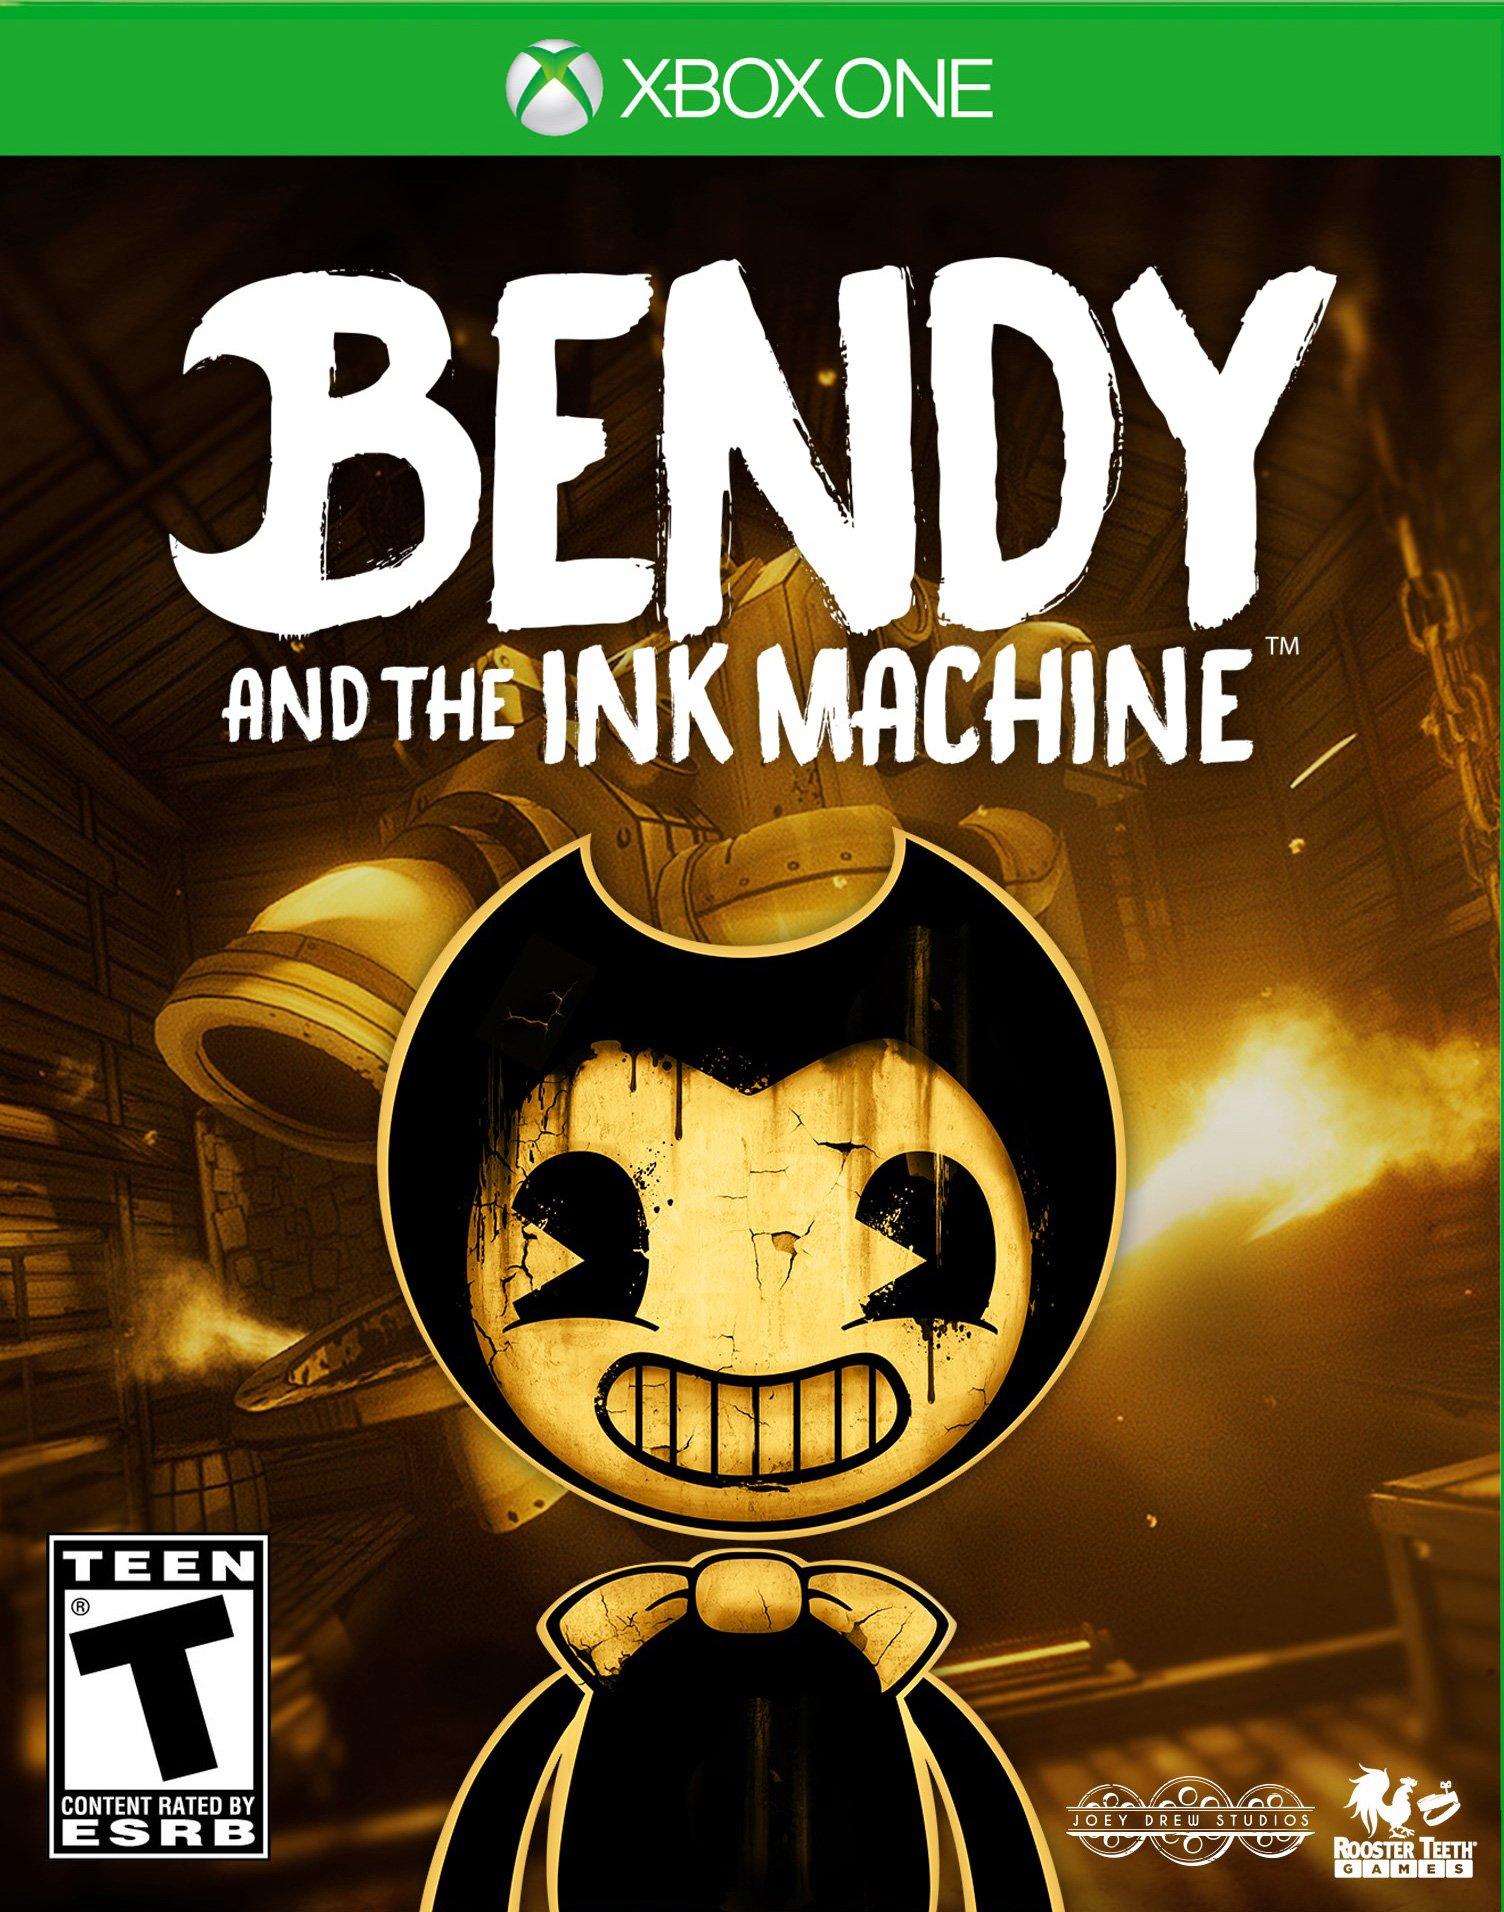 Bendy and the Ink Machine - Xbox One